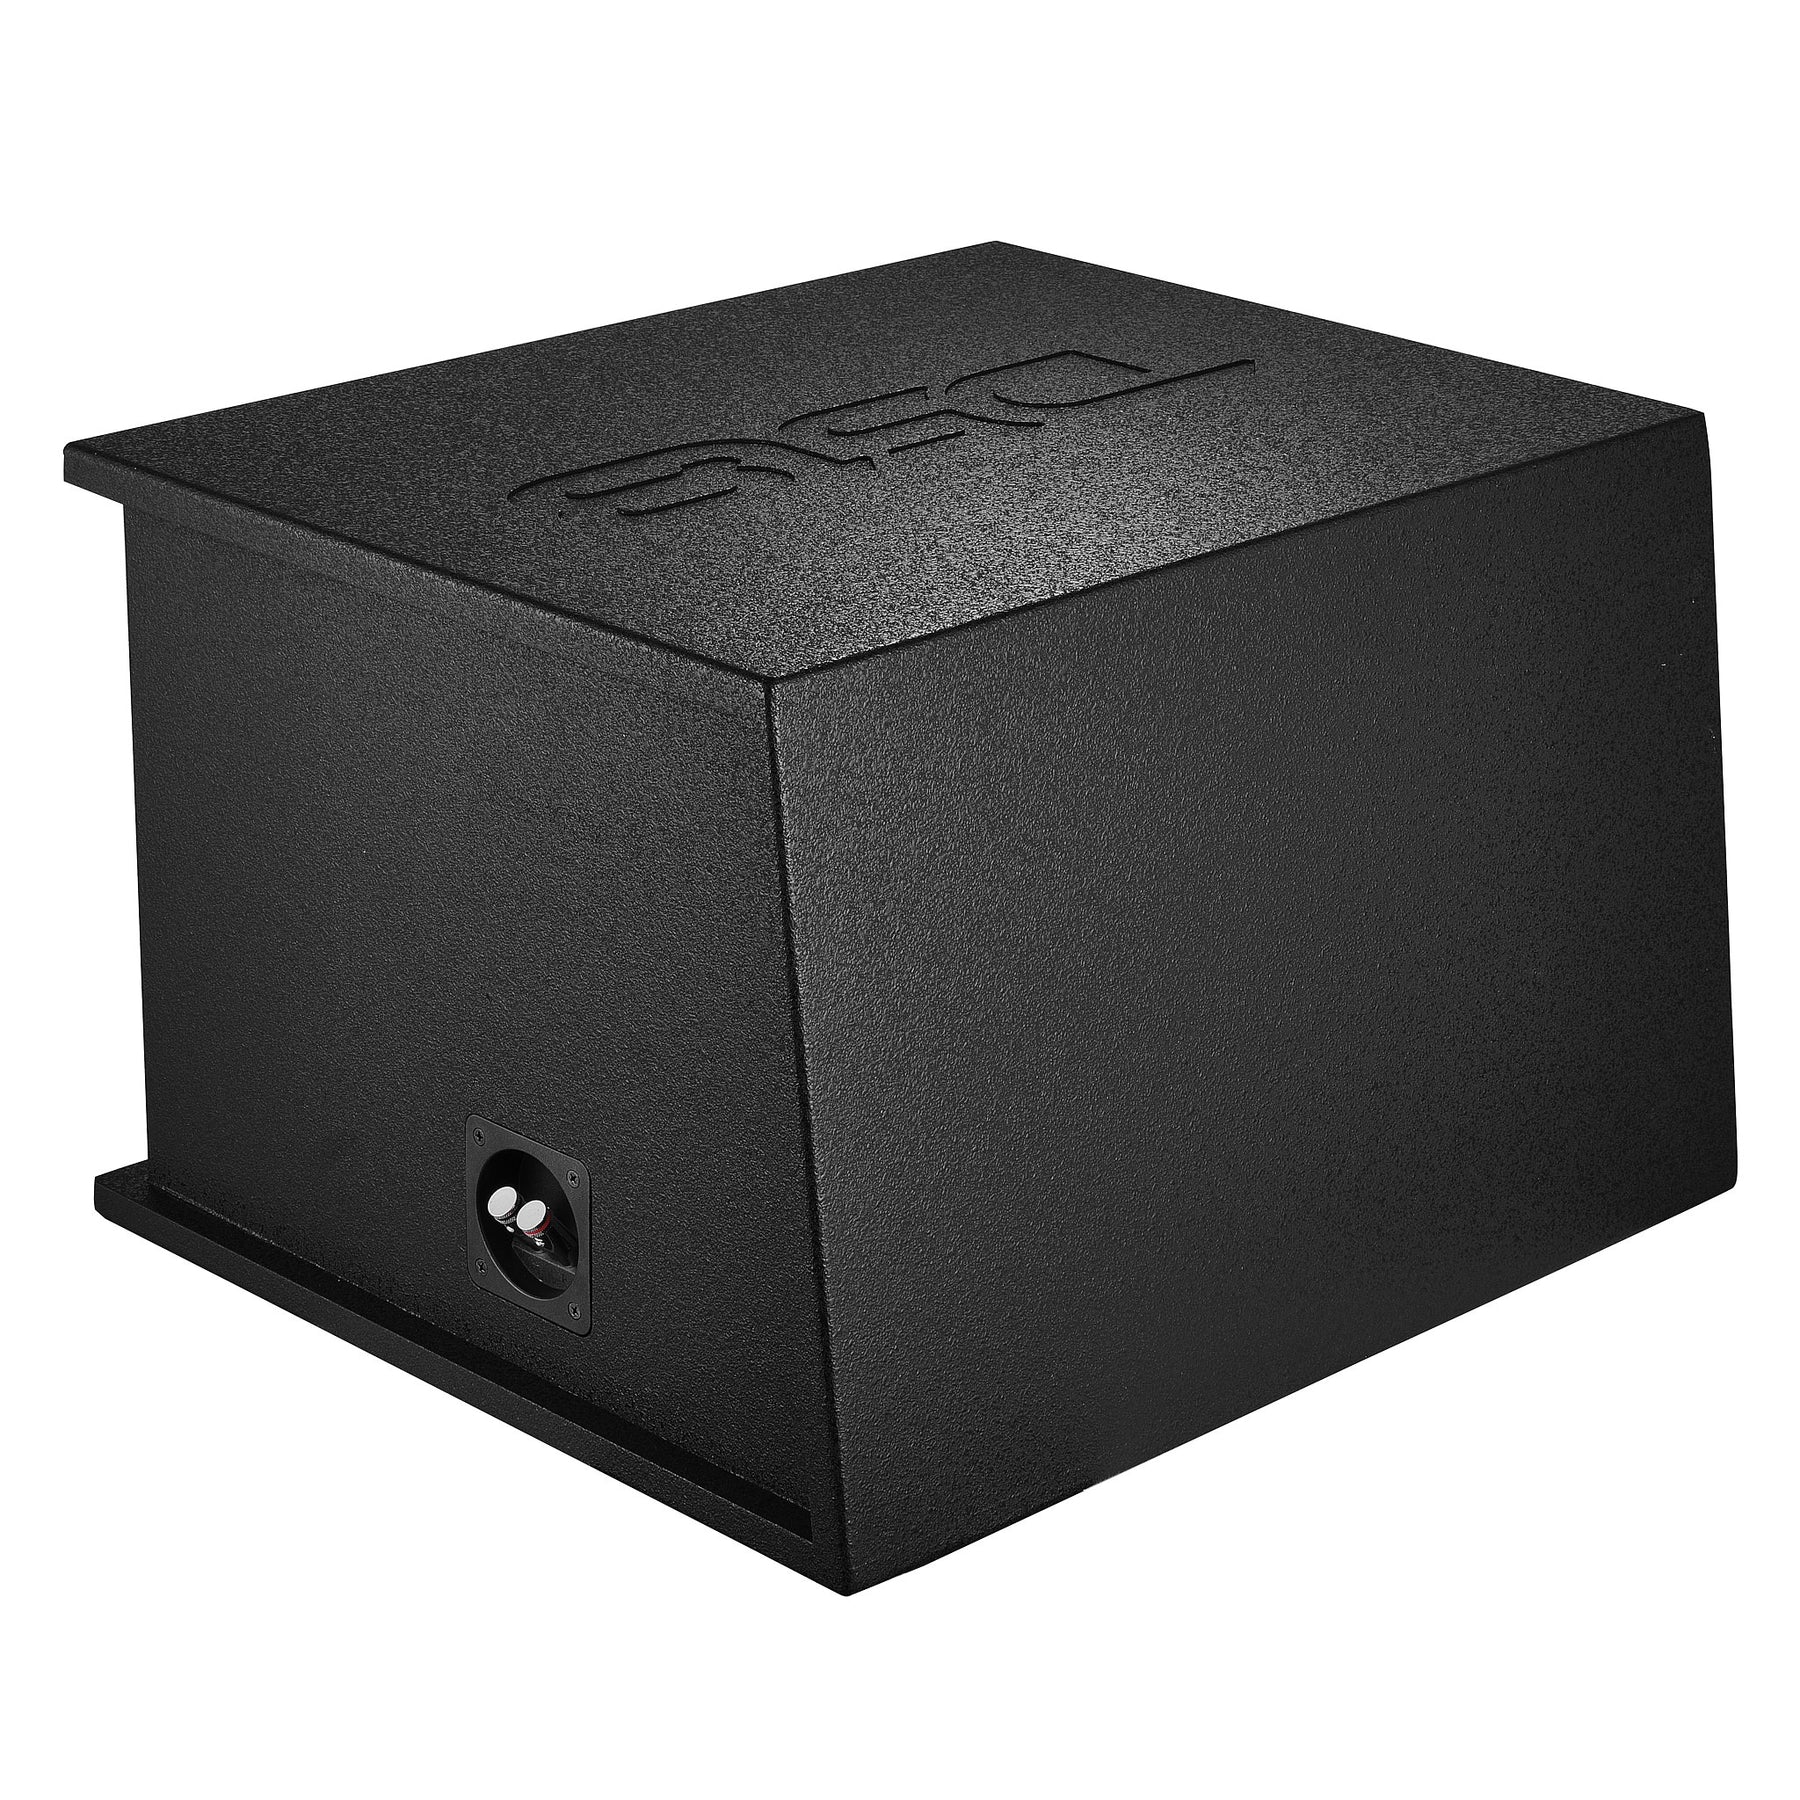 12" Loaded Subwoofer Ported Rugged Armored Enclosure With ZXI12.2D 1000 Watts Rms